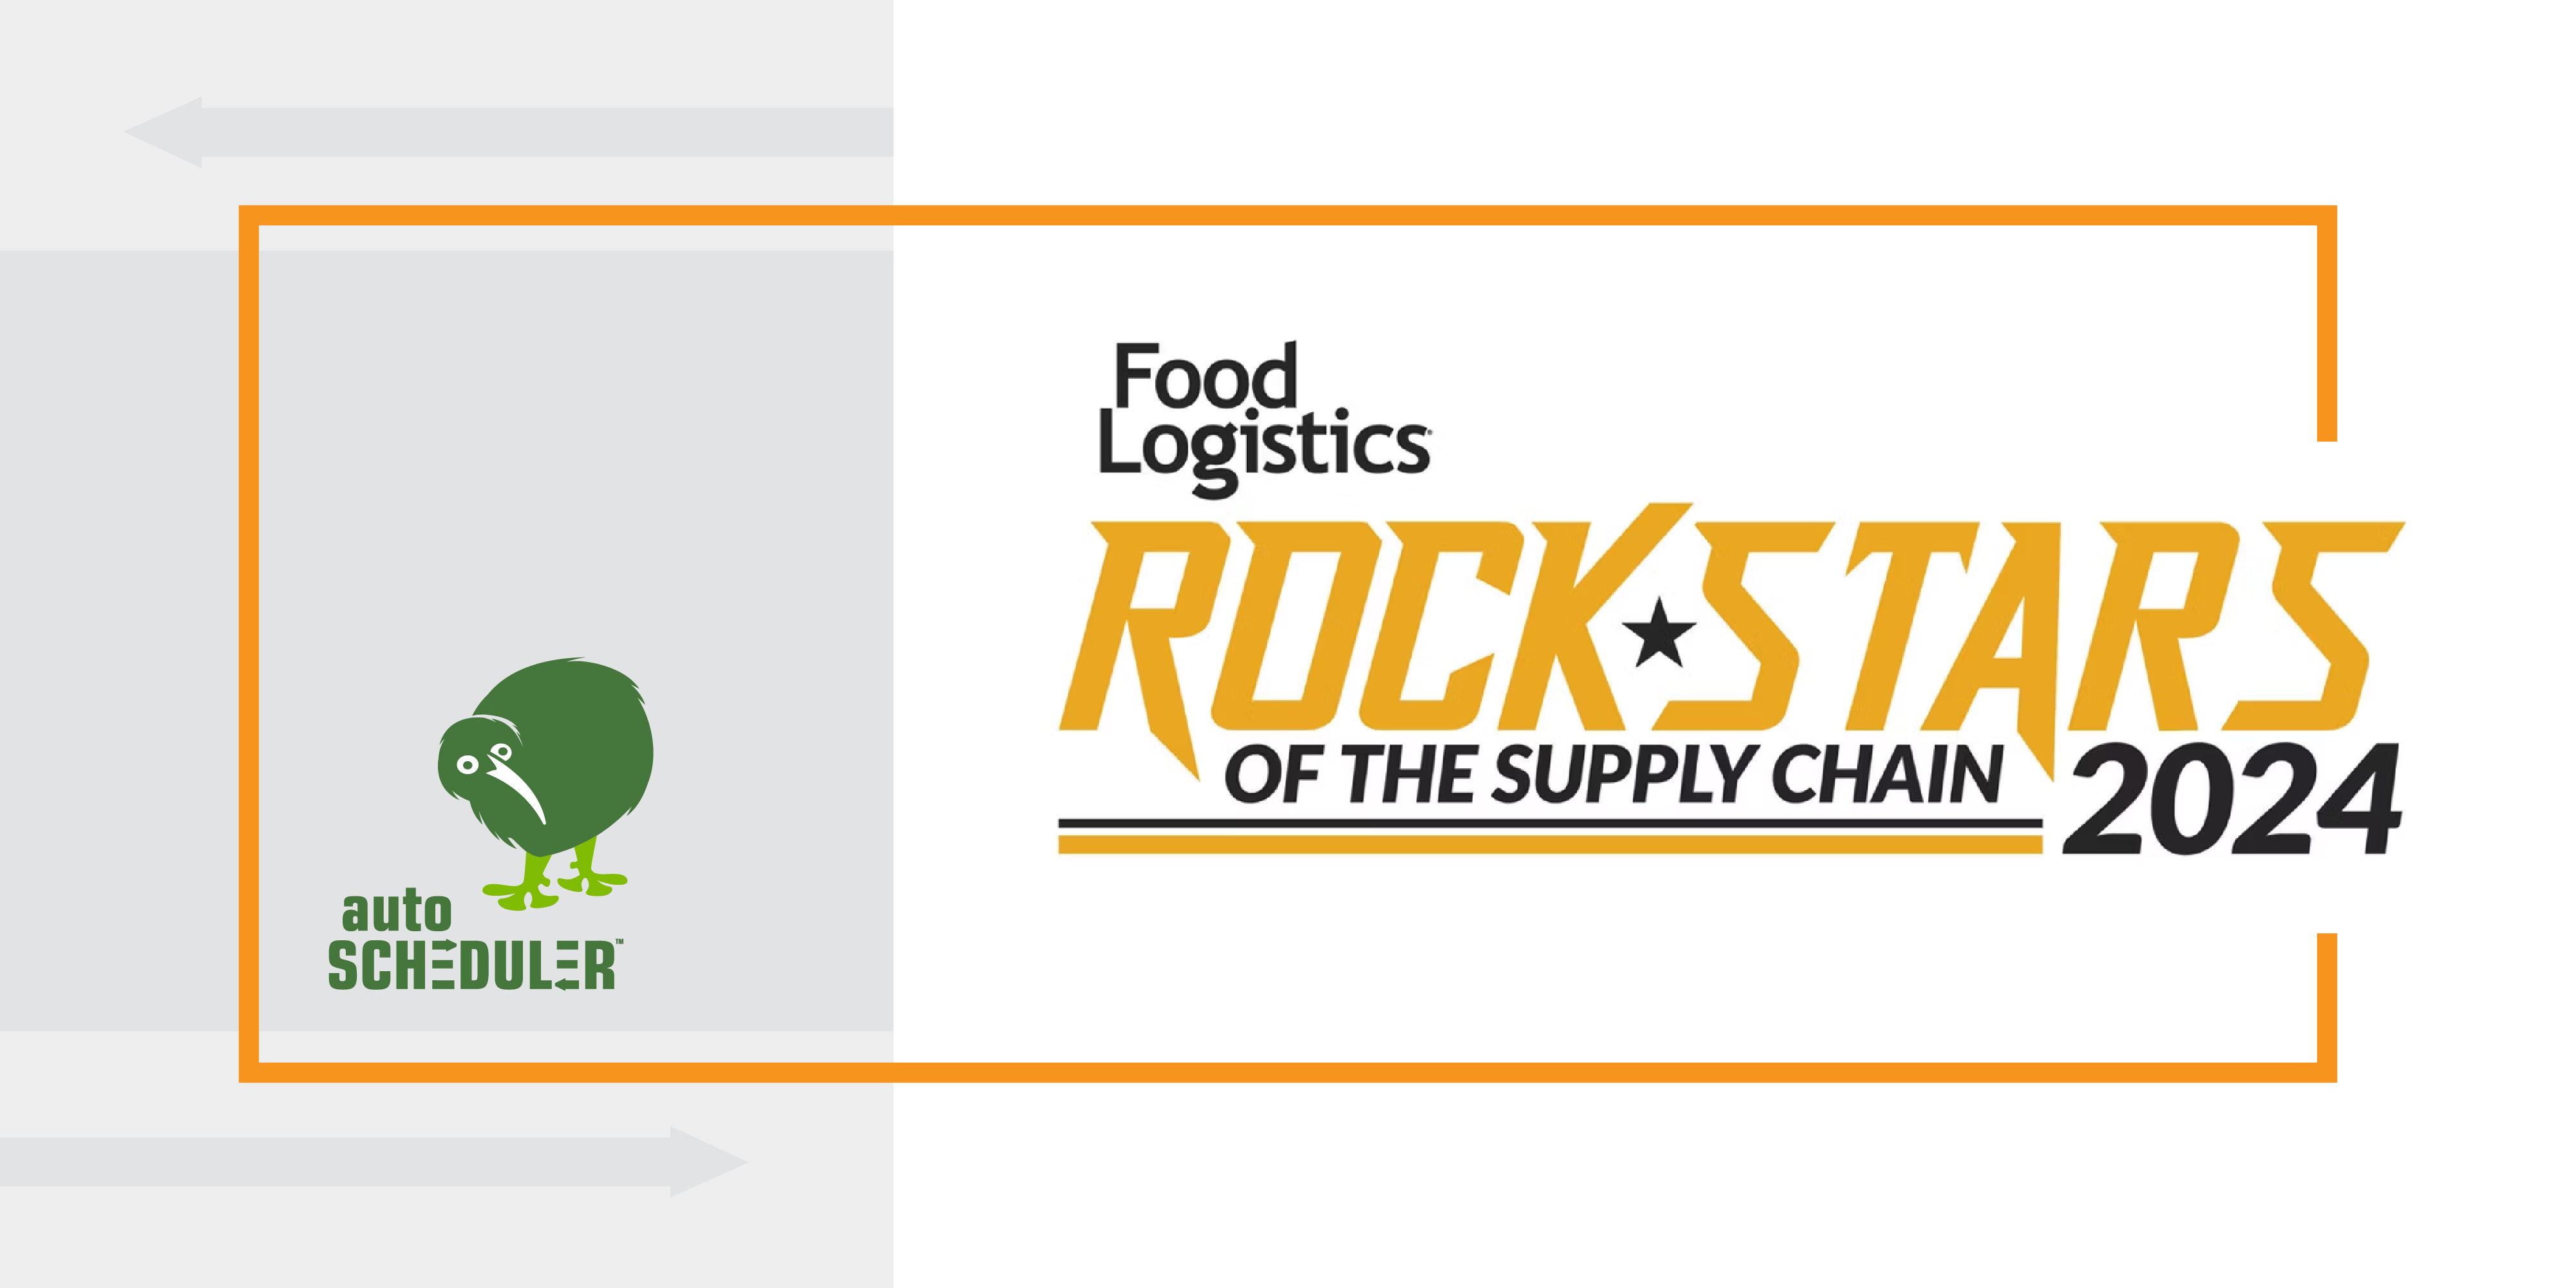 AutoScheduler.AI’s Keith Moore Named 2024 Rock Star of the Supply Chain by Food Logistics